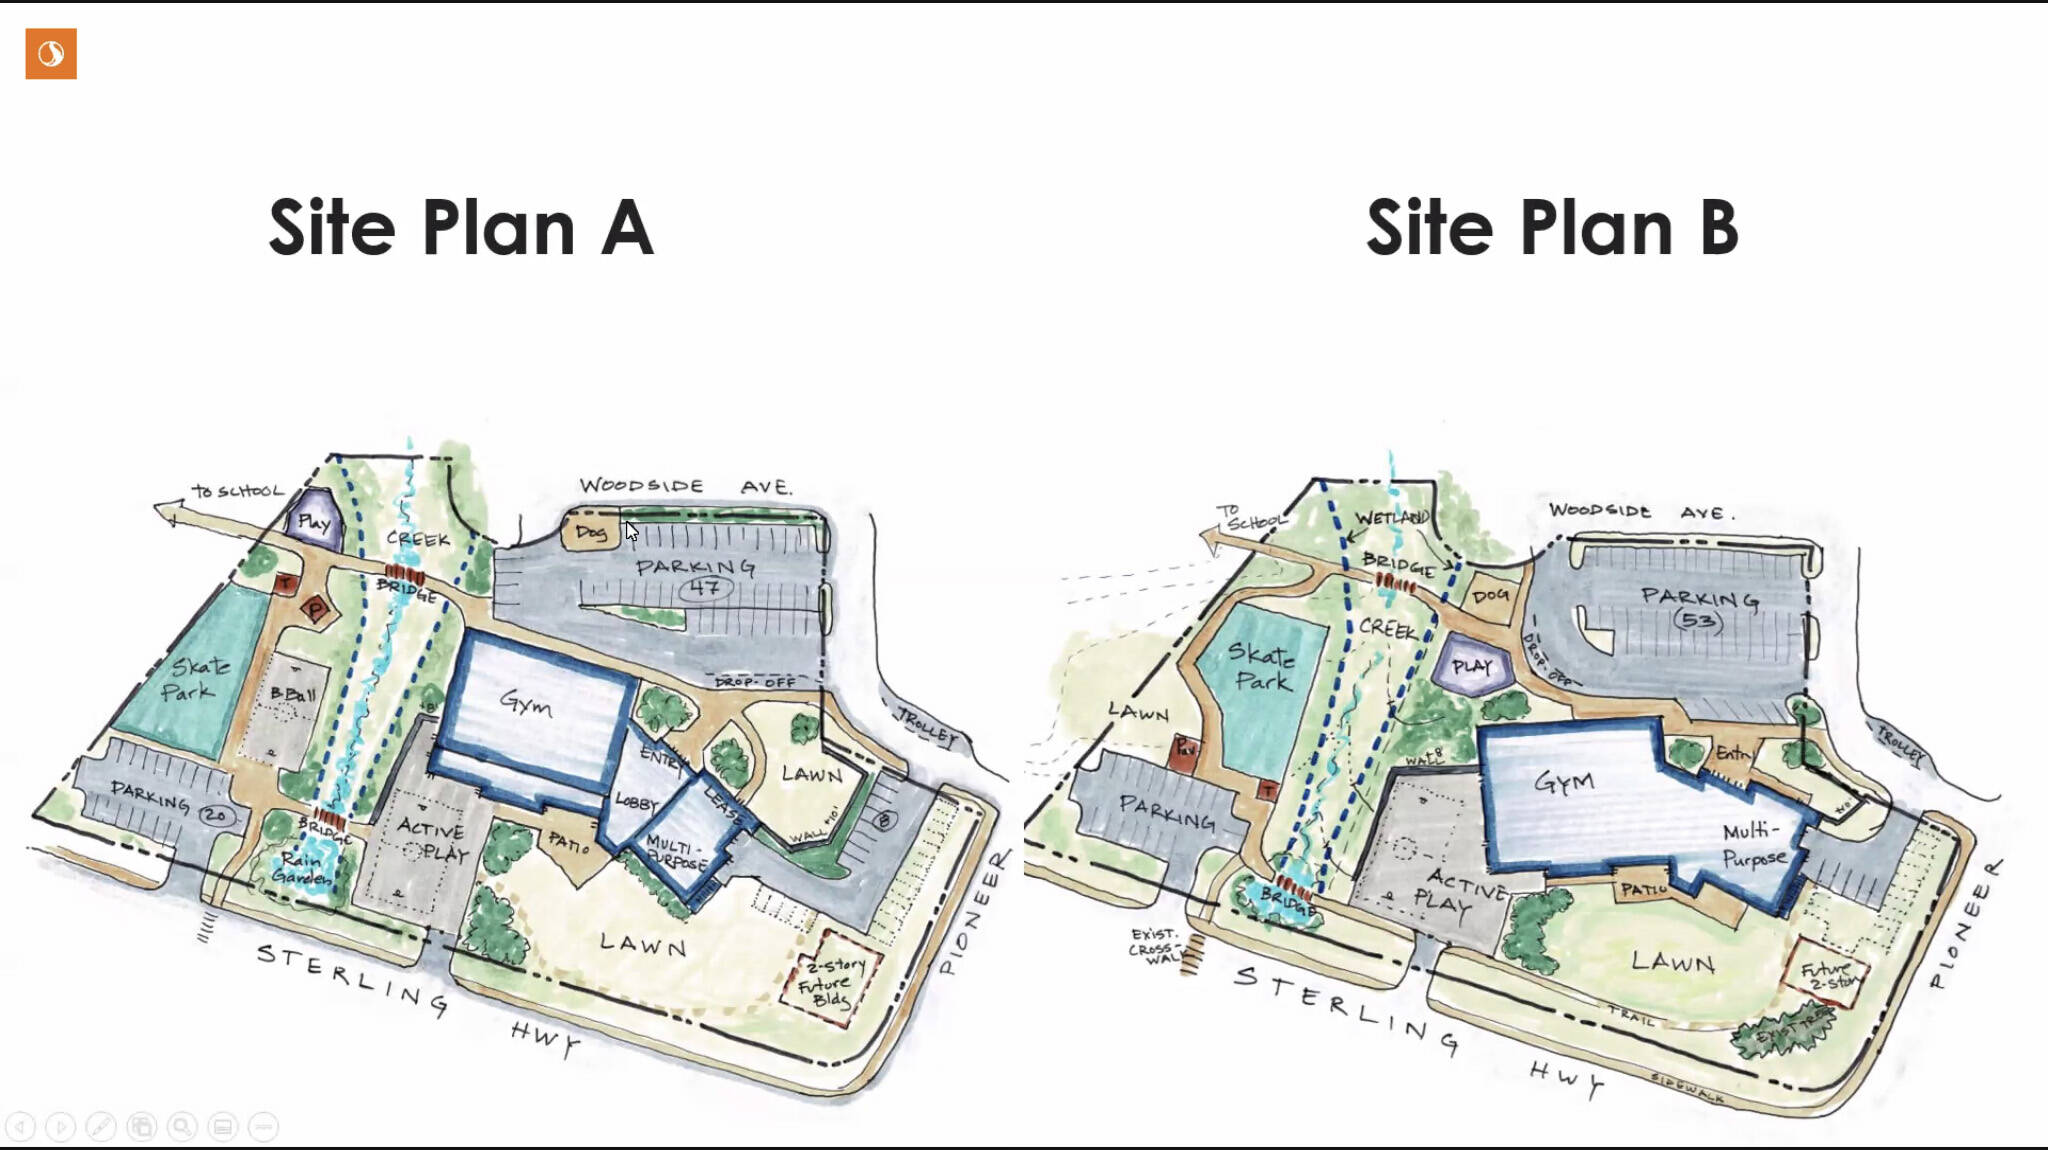 These two site plans prepared by Stantec show site plans and options for a proposed community center to go on the site of the Homer Education and Recreation Complex. Plan A would have a slightly larger play area while Plan B would have a larger lawn area. Stantec staff presented the plans at the Homer City Council meeting on Monday, Feb. 28, 2022, at the Cowles Council Chambers, Homer City Hall, Homer, Alaska. (Screen capture/Stantec)